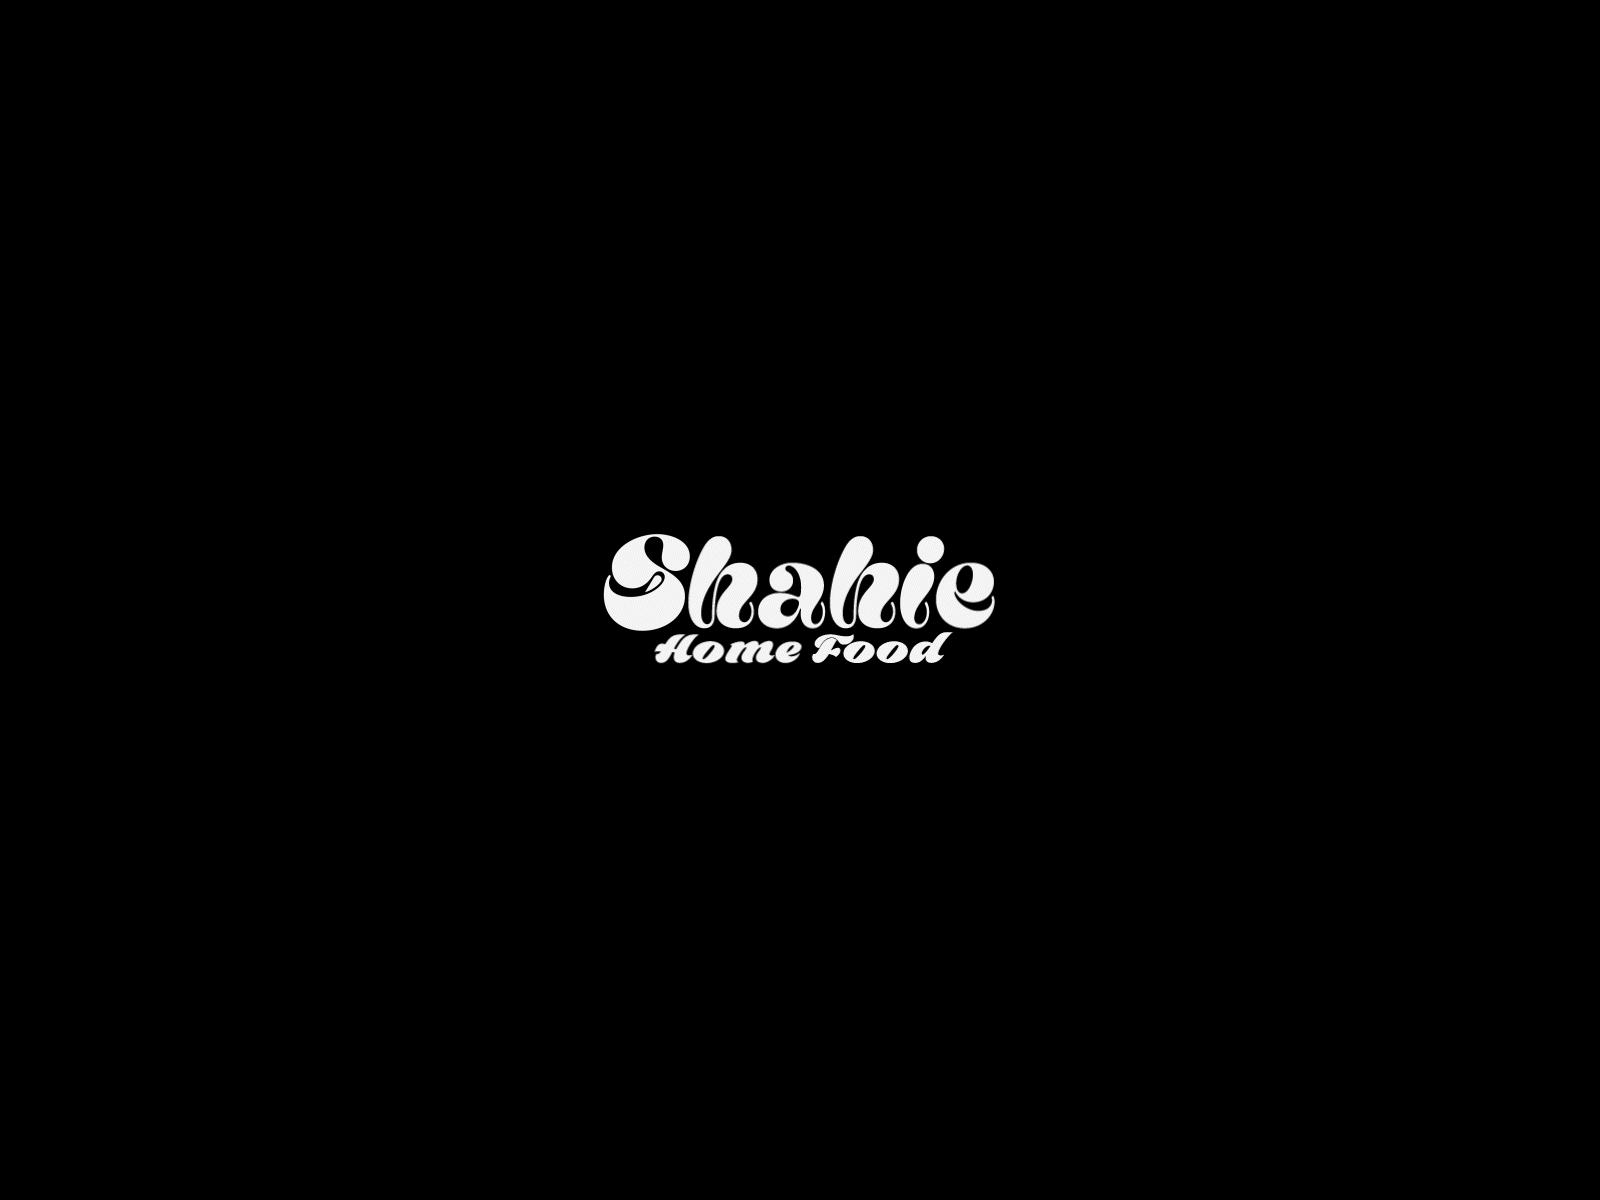 Shahie Logo Animation 2d animation 2danimation after effect after effects motion graphics aftereffects animation design food food logo foodlogo illustration logo logoanimation logoanimations logos motiongraphics